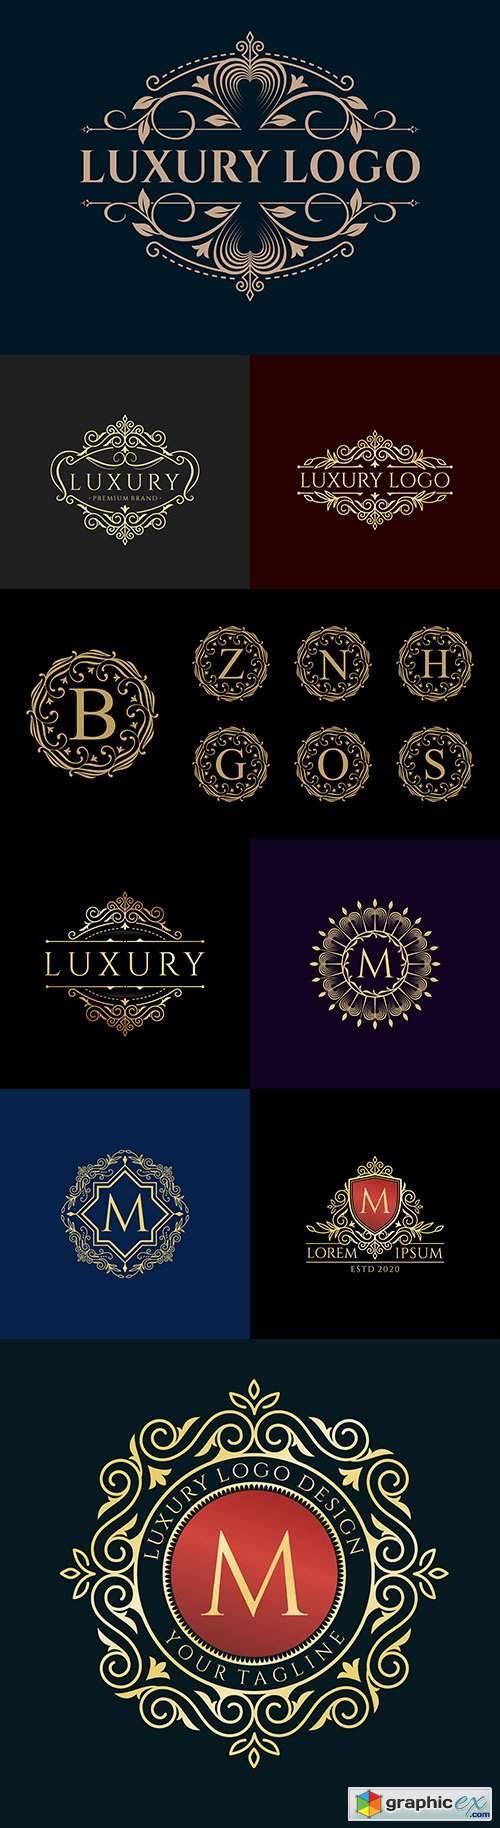  Letter and vintage luxurious logo collection design 